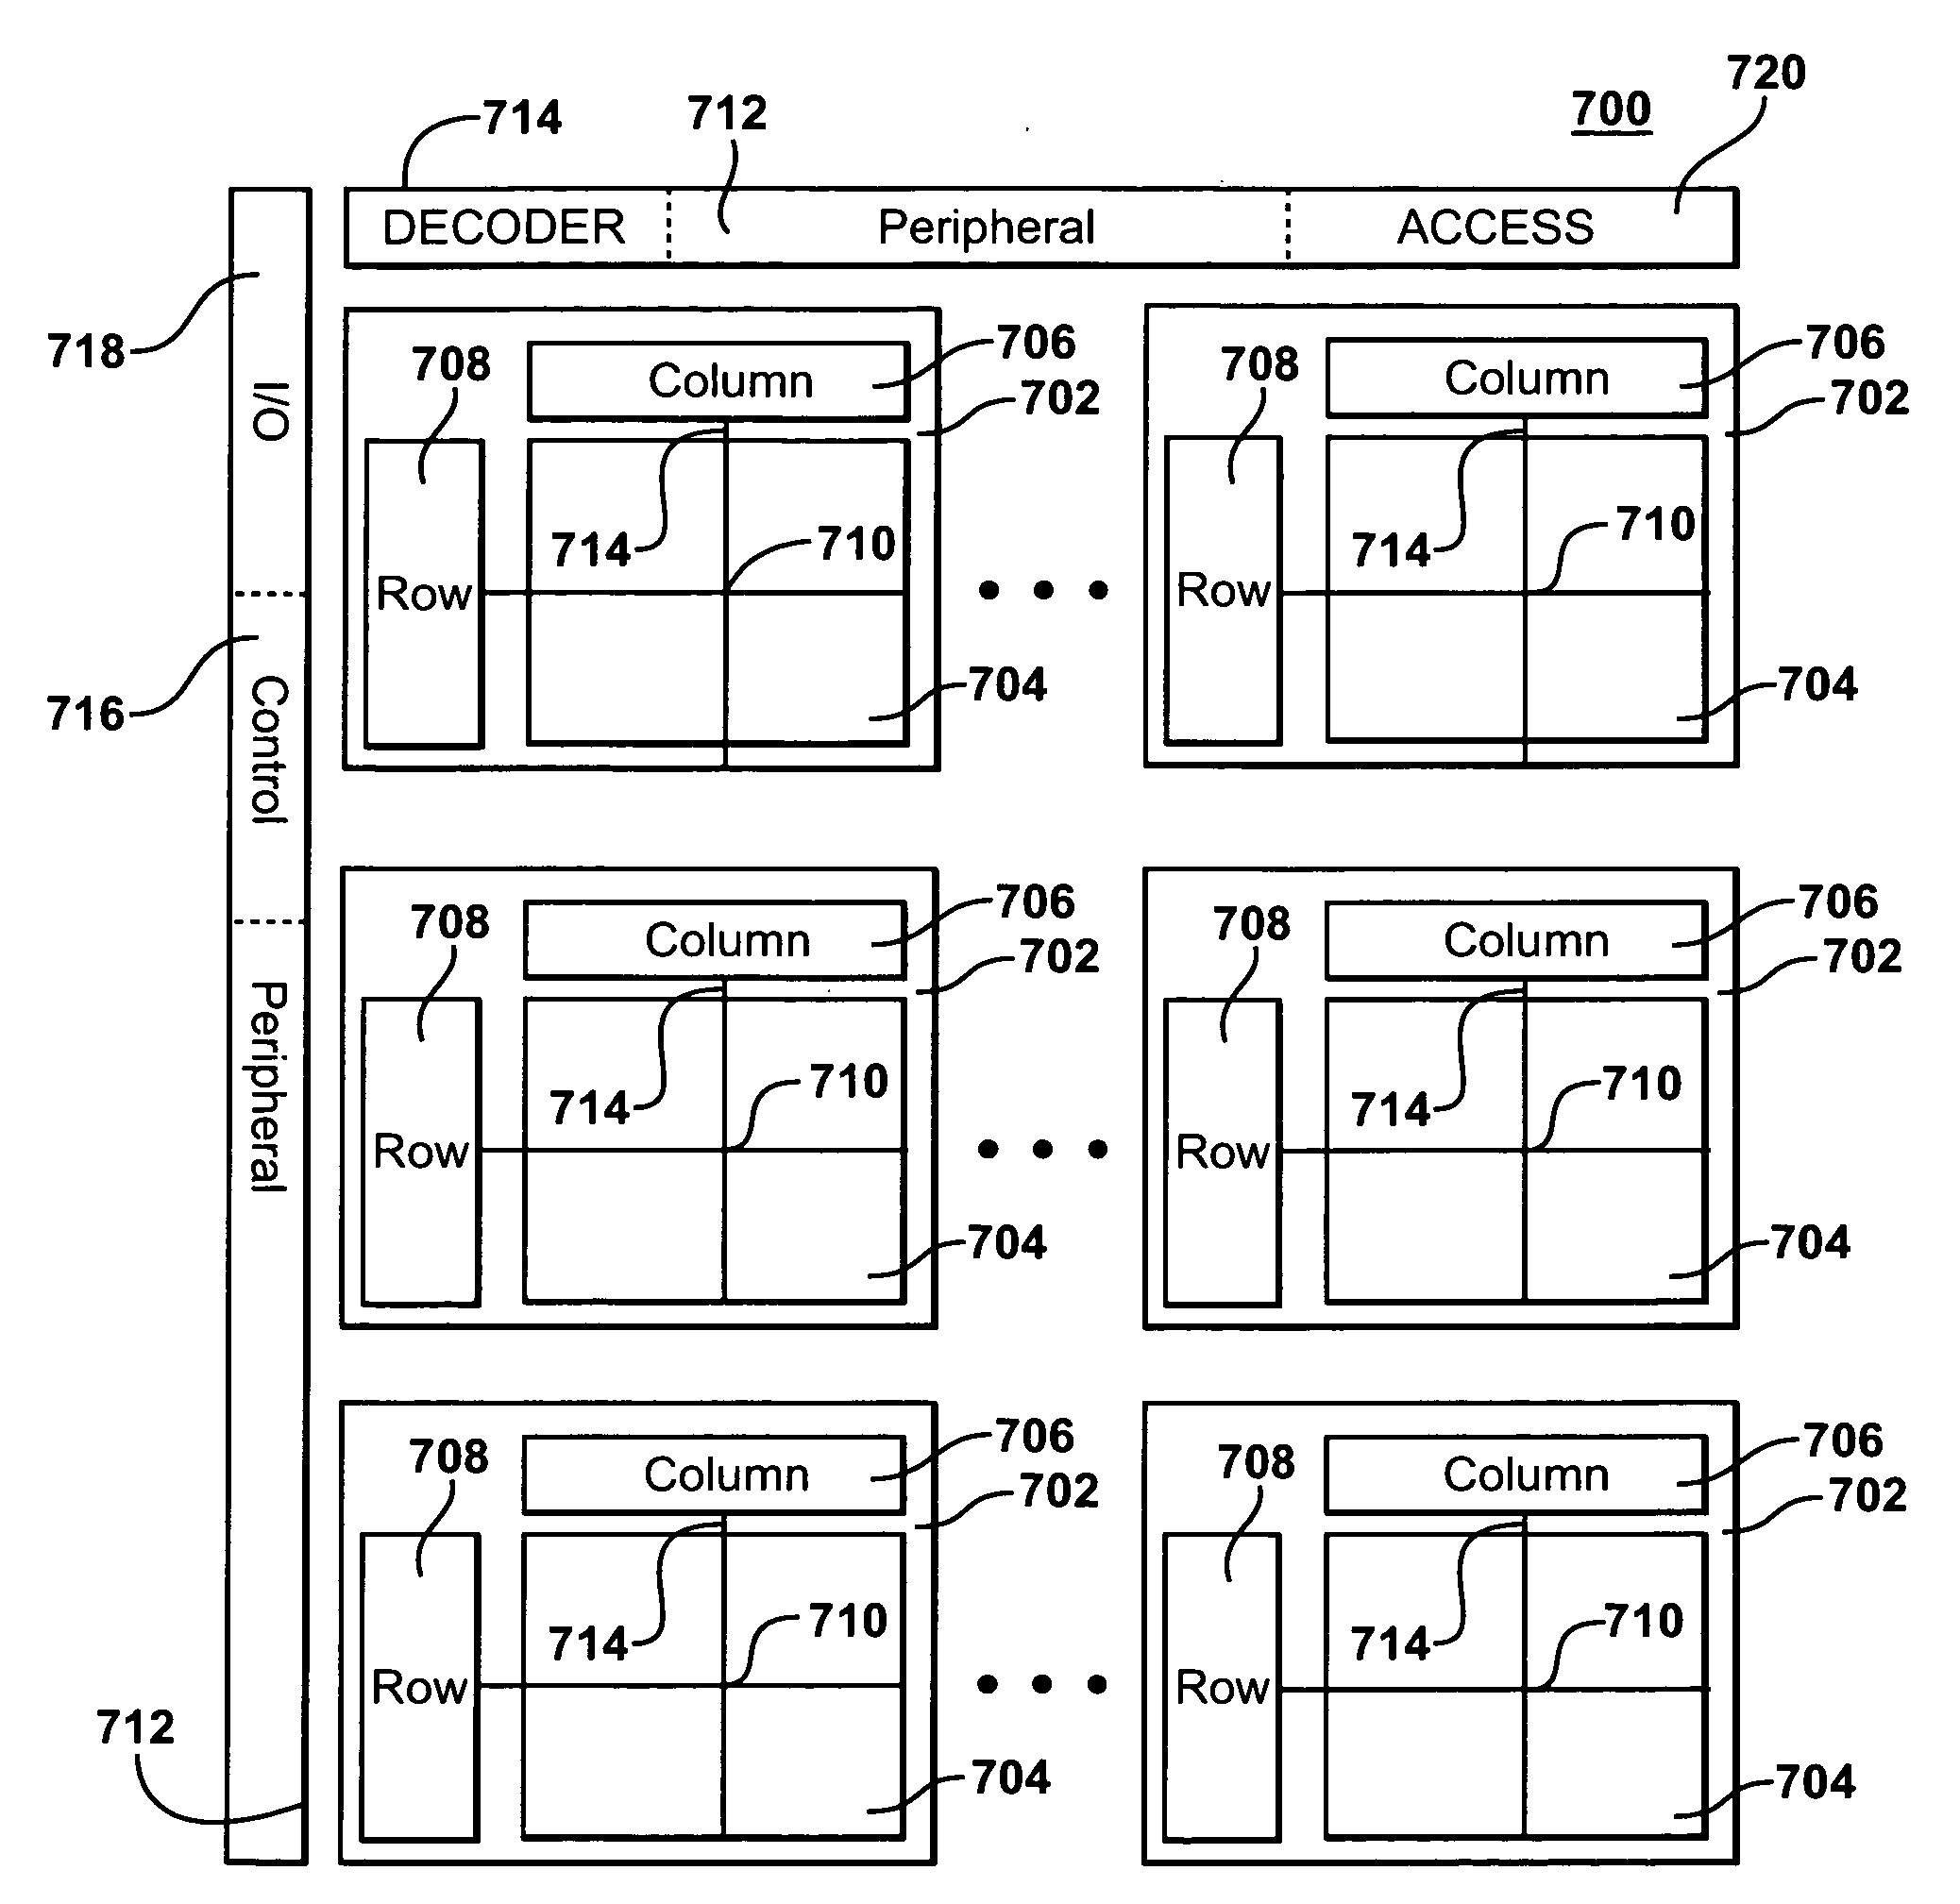 Apparatus and method for memory